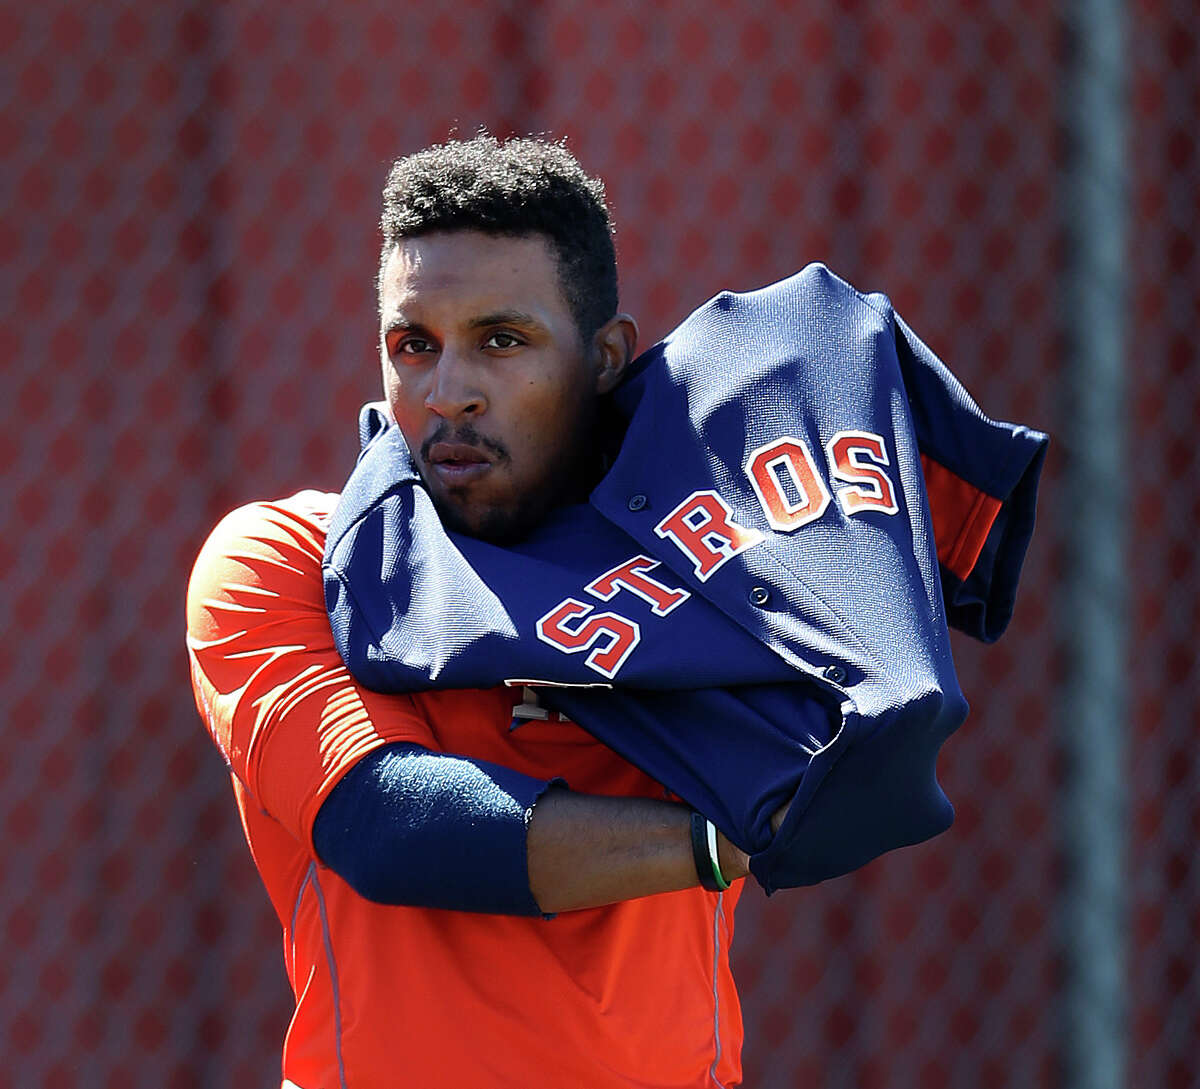 Houston Astros infielder Tony Kemp puts on his jersey at the Astros spring training in Kissimmee, Florida, Friday, Feb. 26, 2016.( Karen Warren / Houston Chronicle )